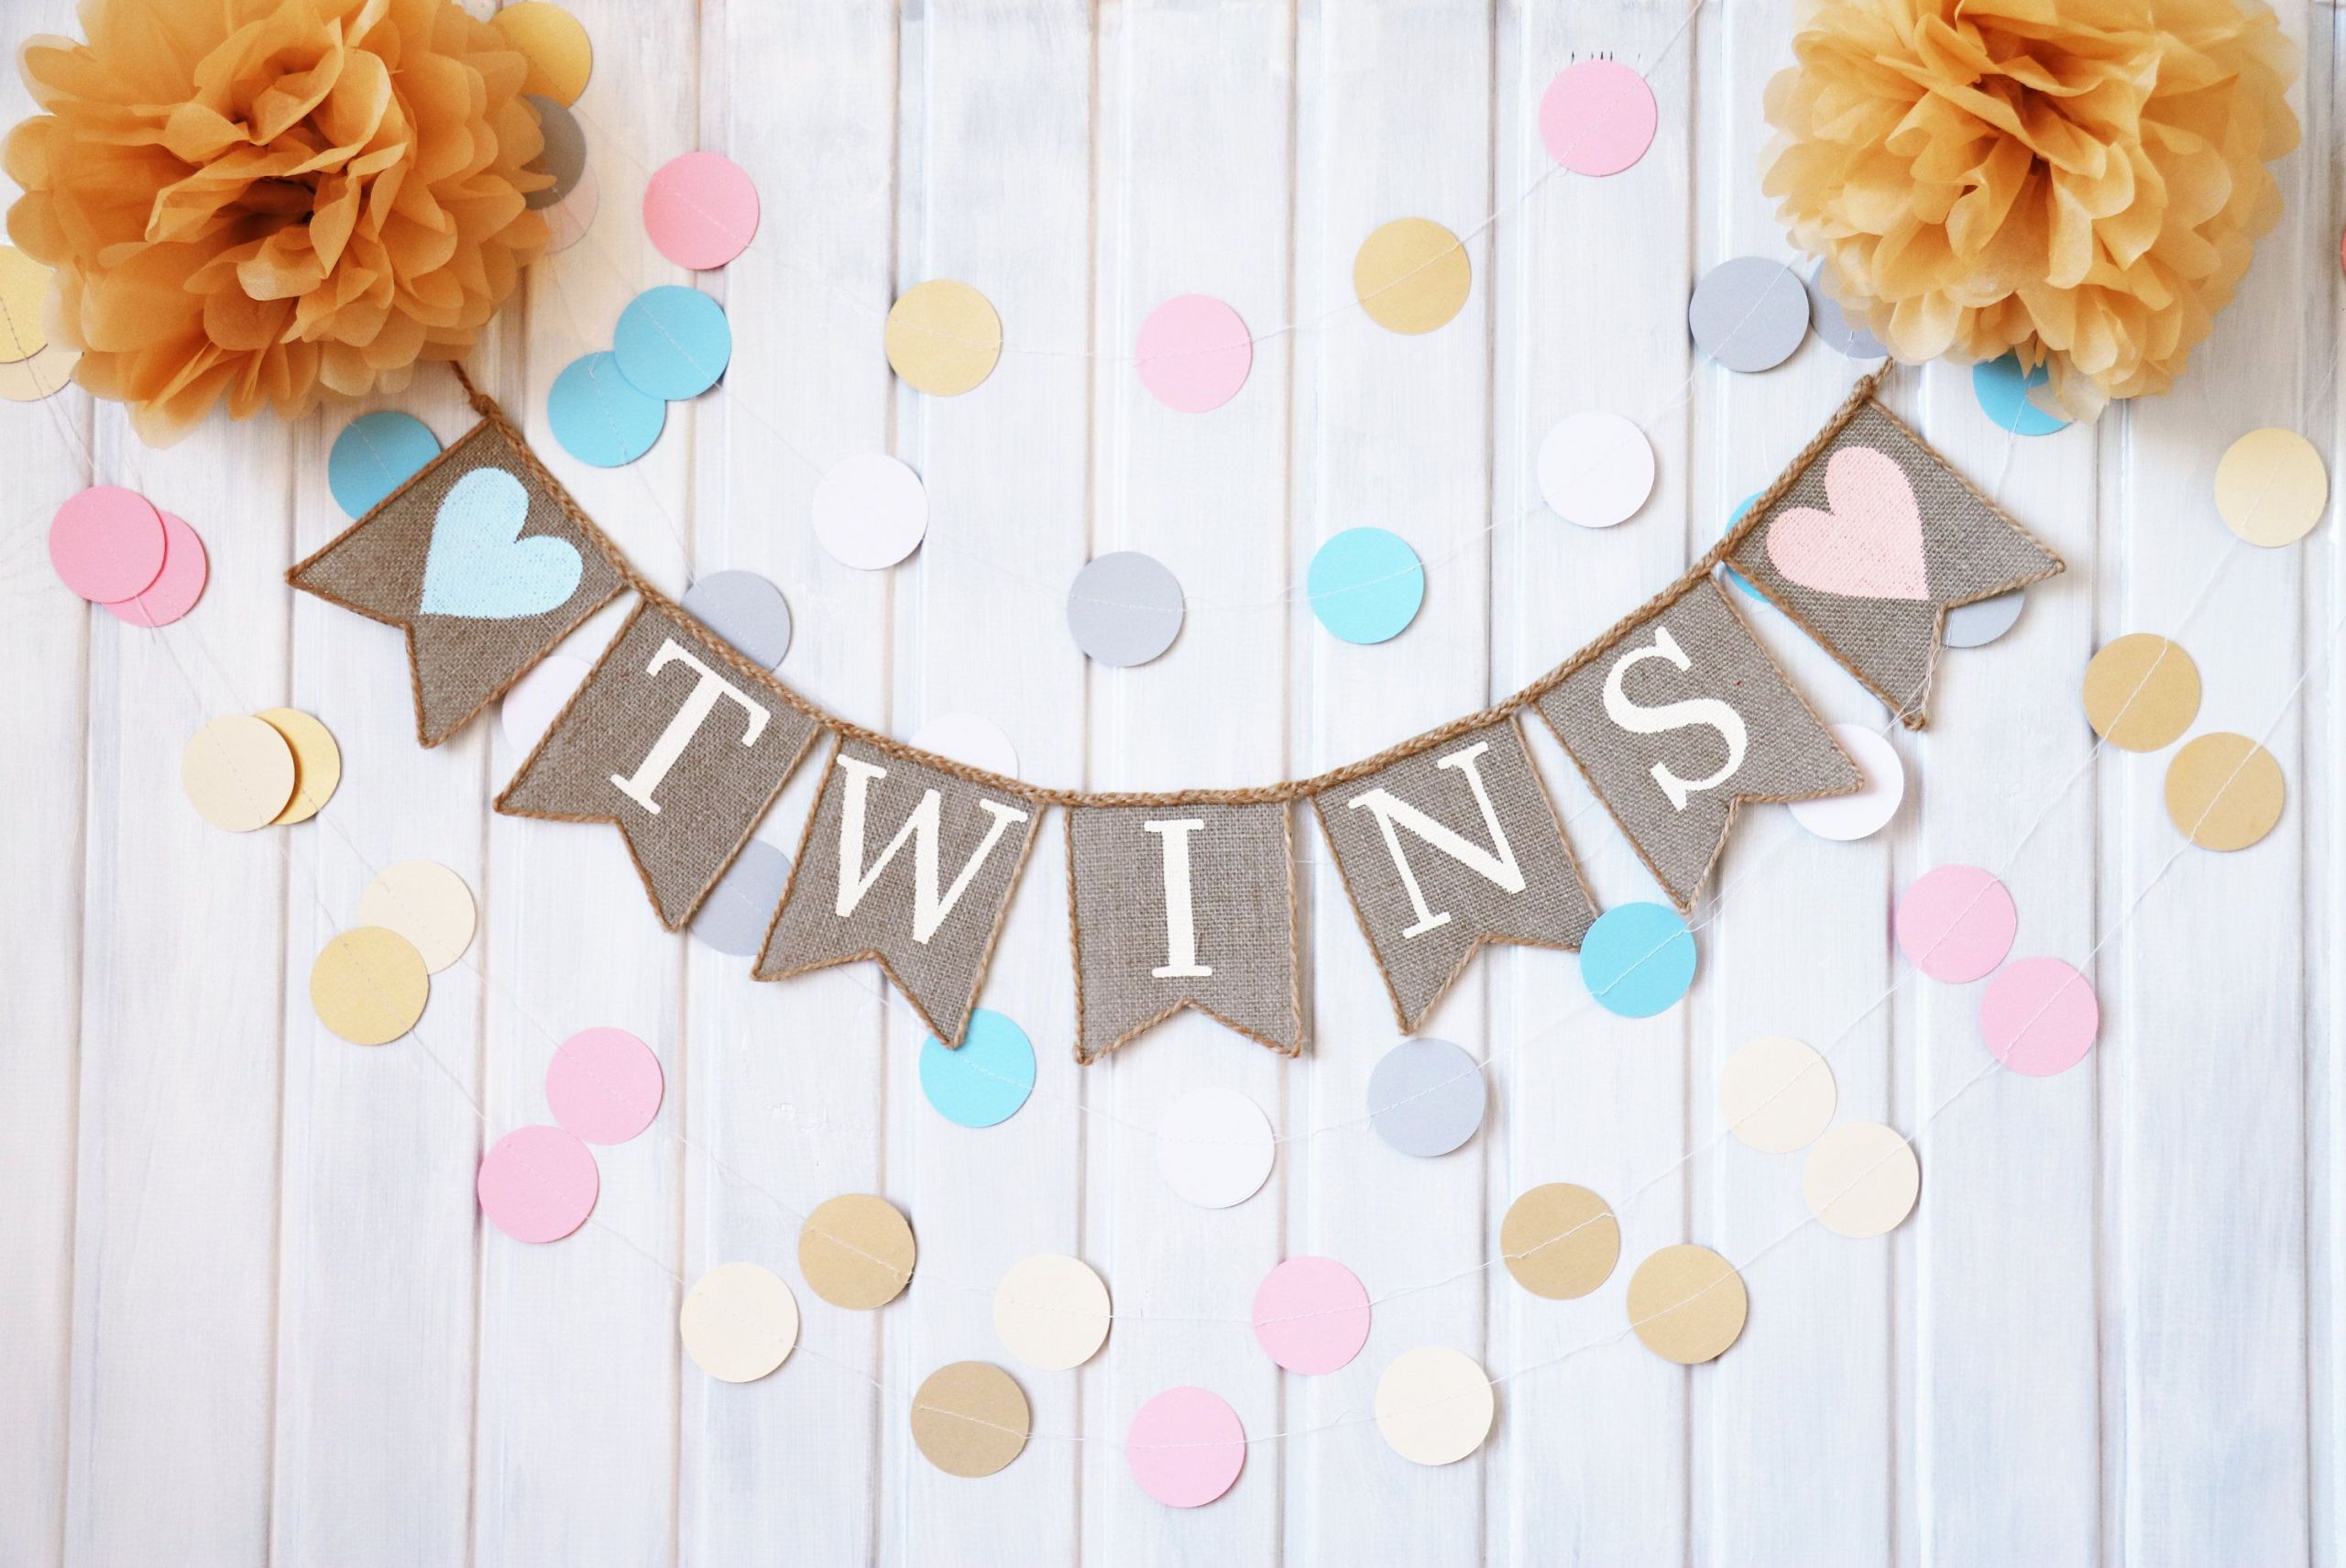 Twins Baby Shower Party Favors
 TWINS BANNER TWINS BUNTING TWINS BABY SHOWER DECORATIONS